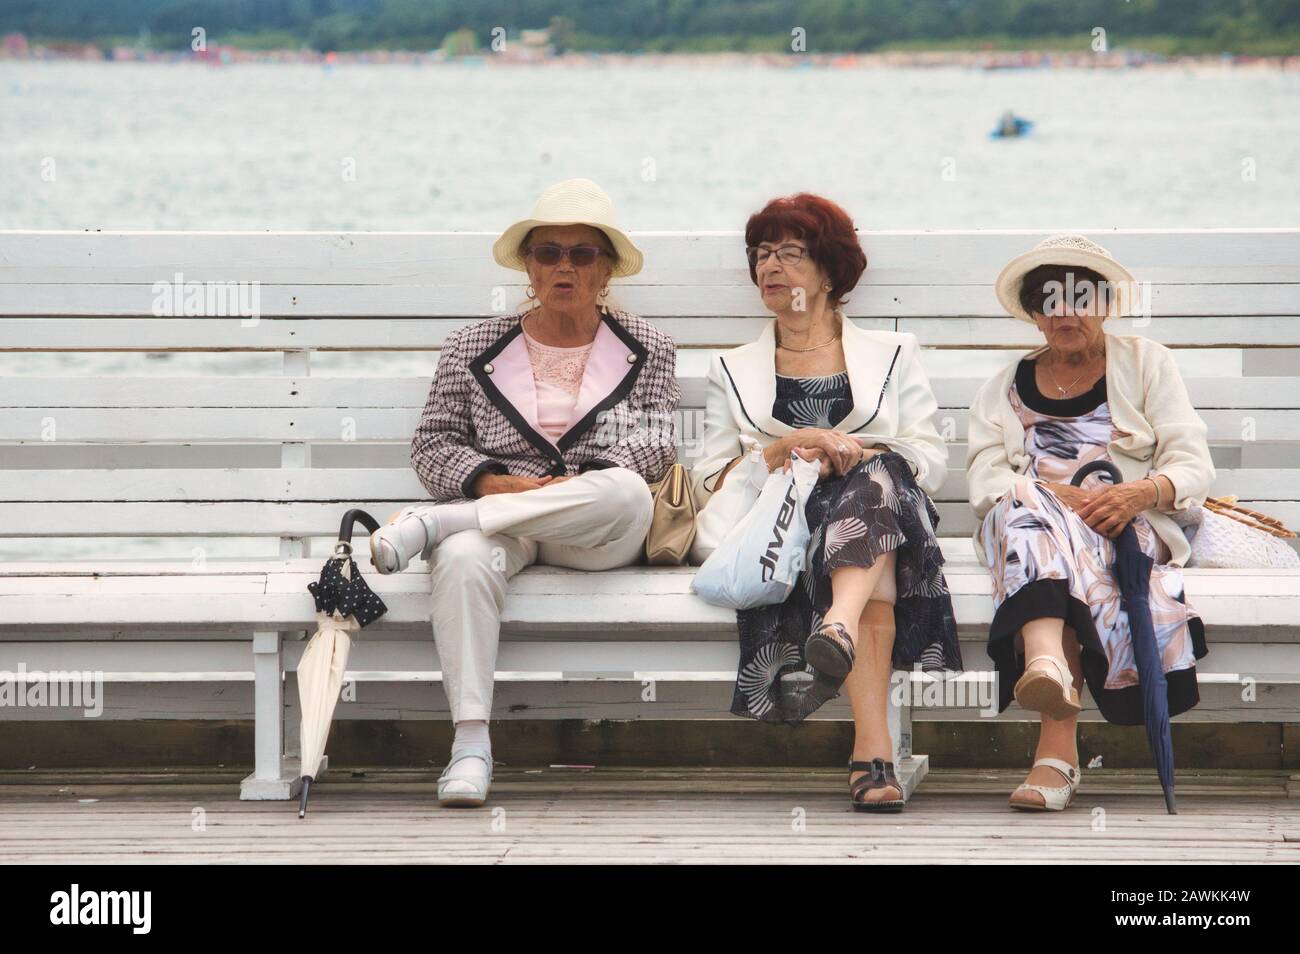 Sopot / Poland - August 3 2019: Three old ladies sat together chatting on a public bench at the beach Stock Photo